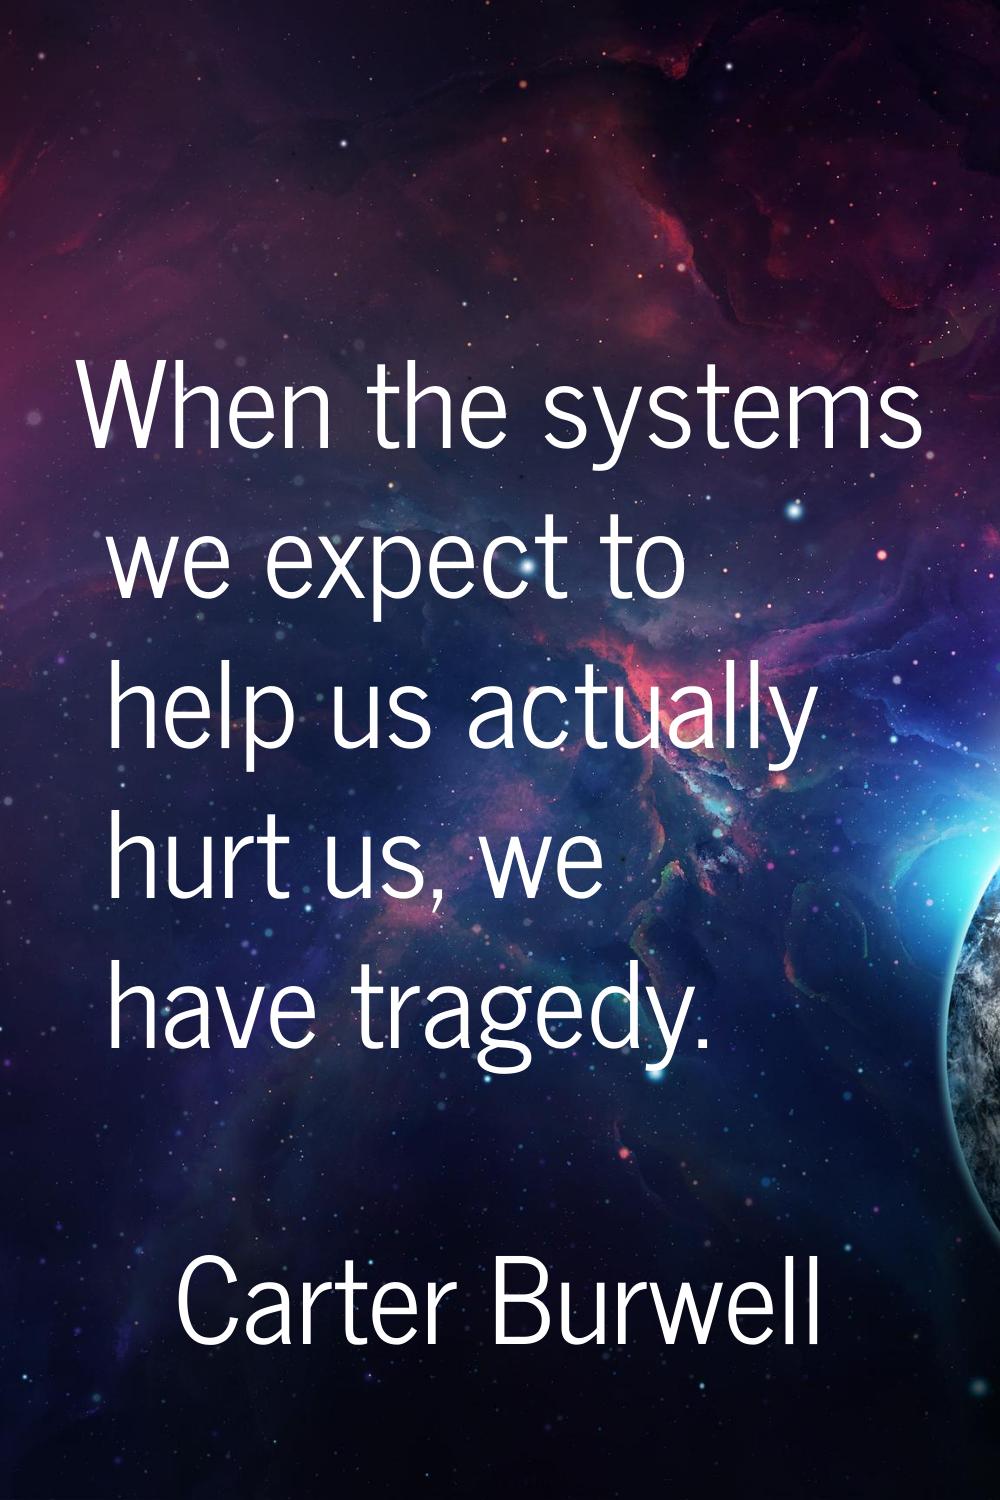 When the systems we expect to help us actually hurt us, we have tragedy.